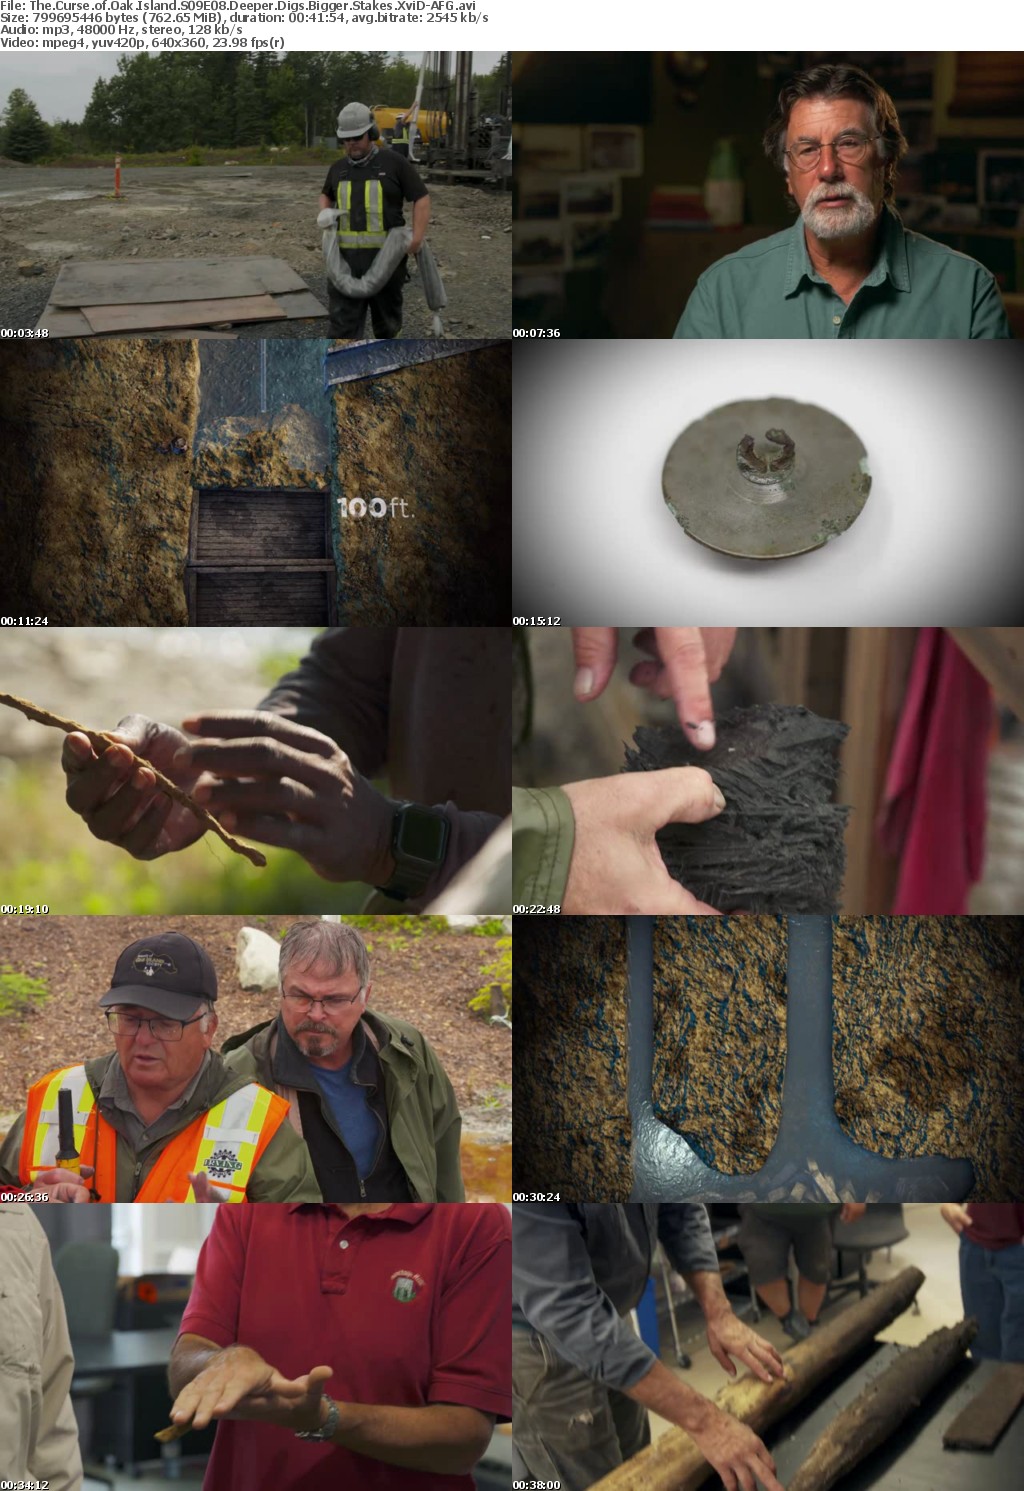 The Curse of Oak Island S09E08 Deeper Digs Bigger Stakes XviD-AFG